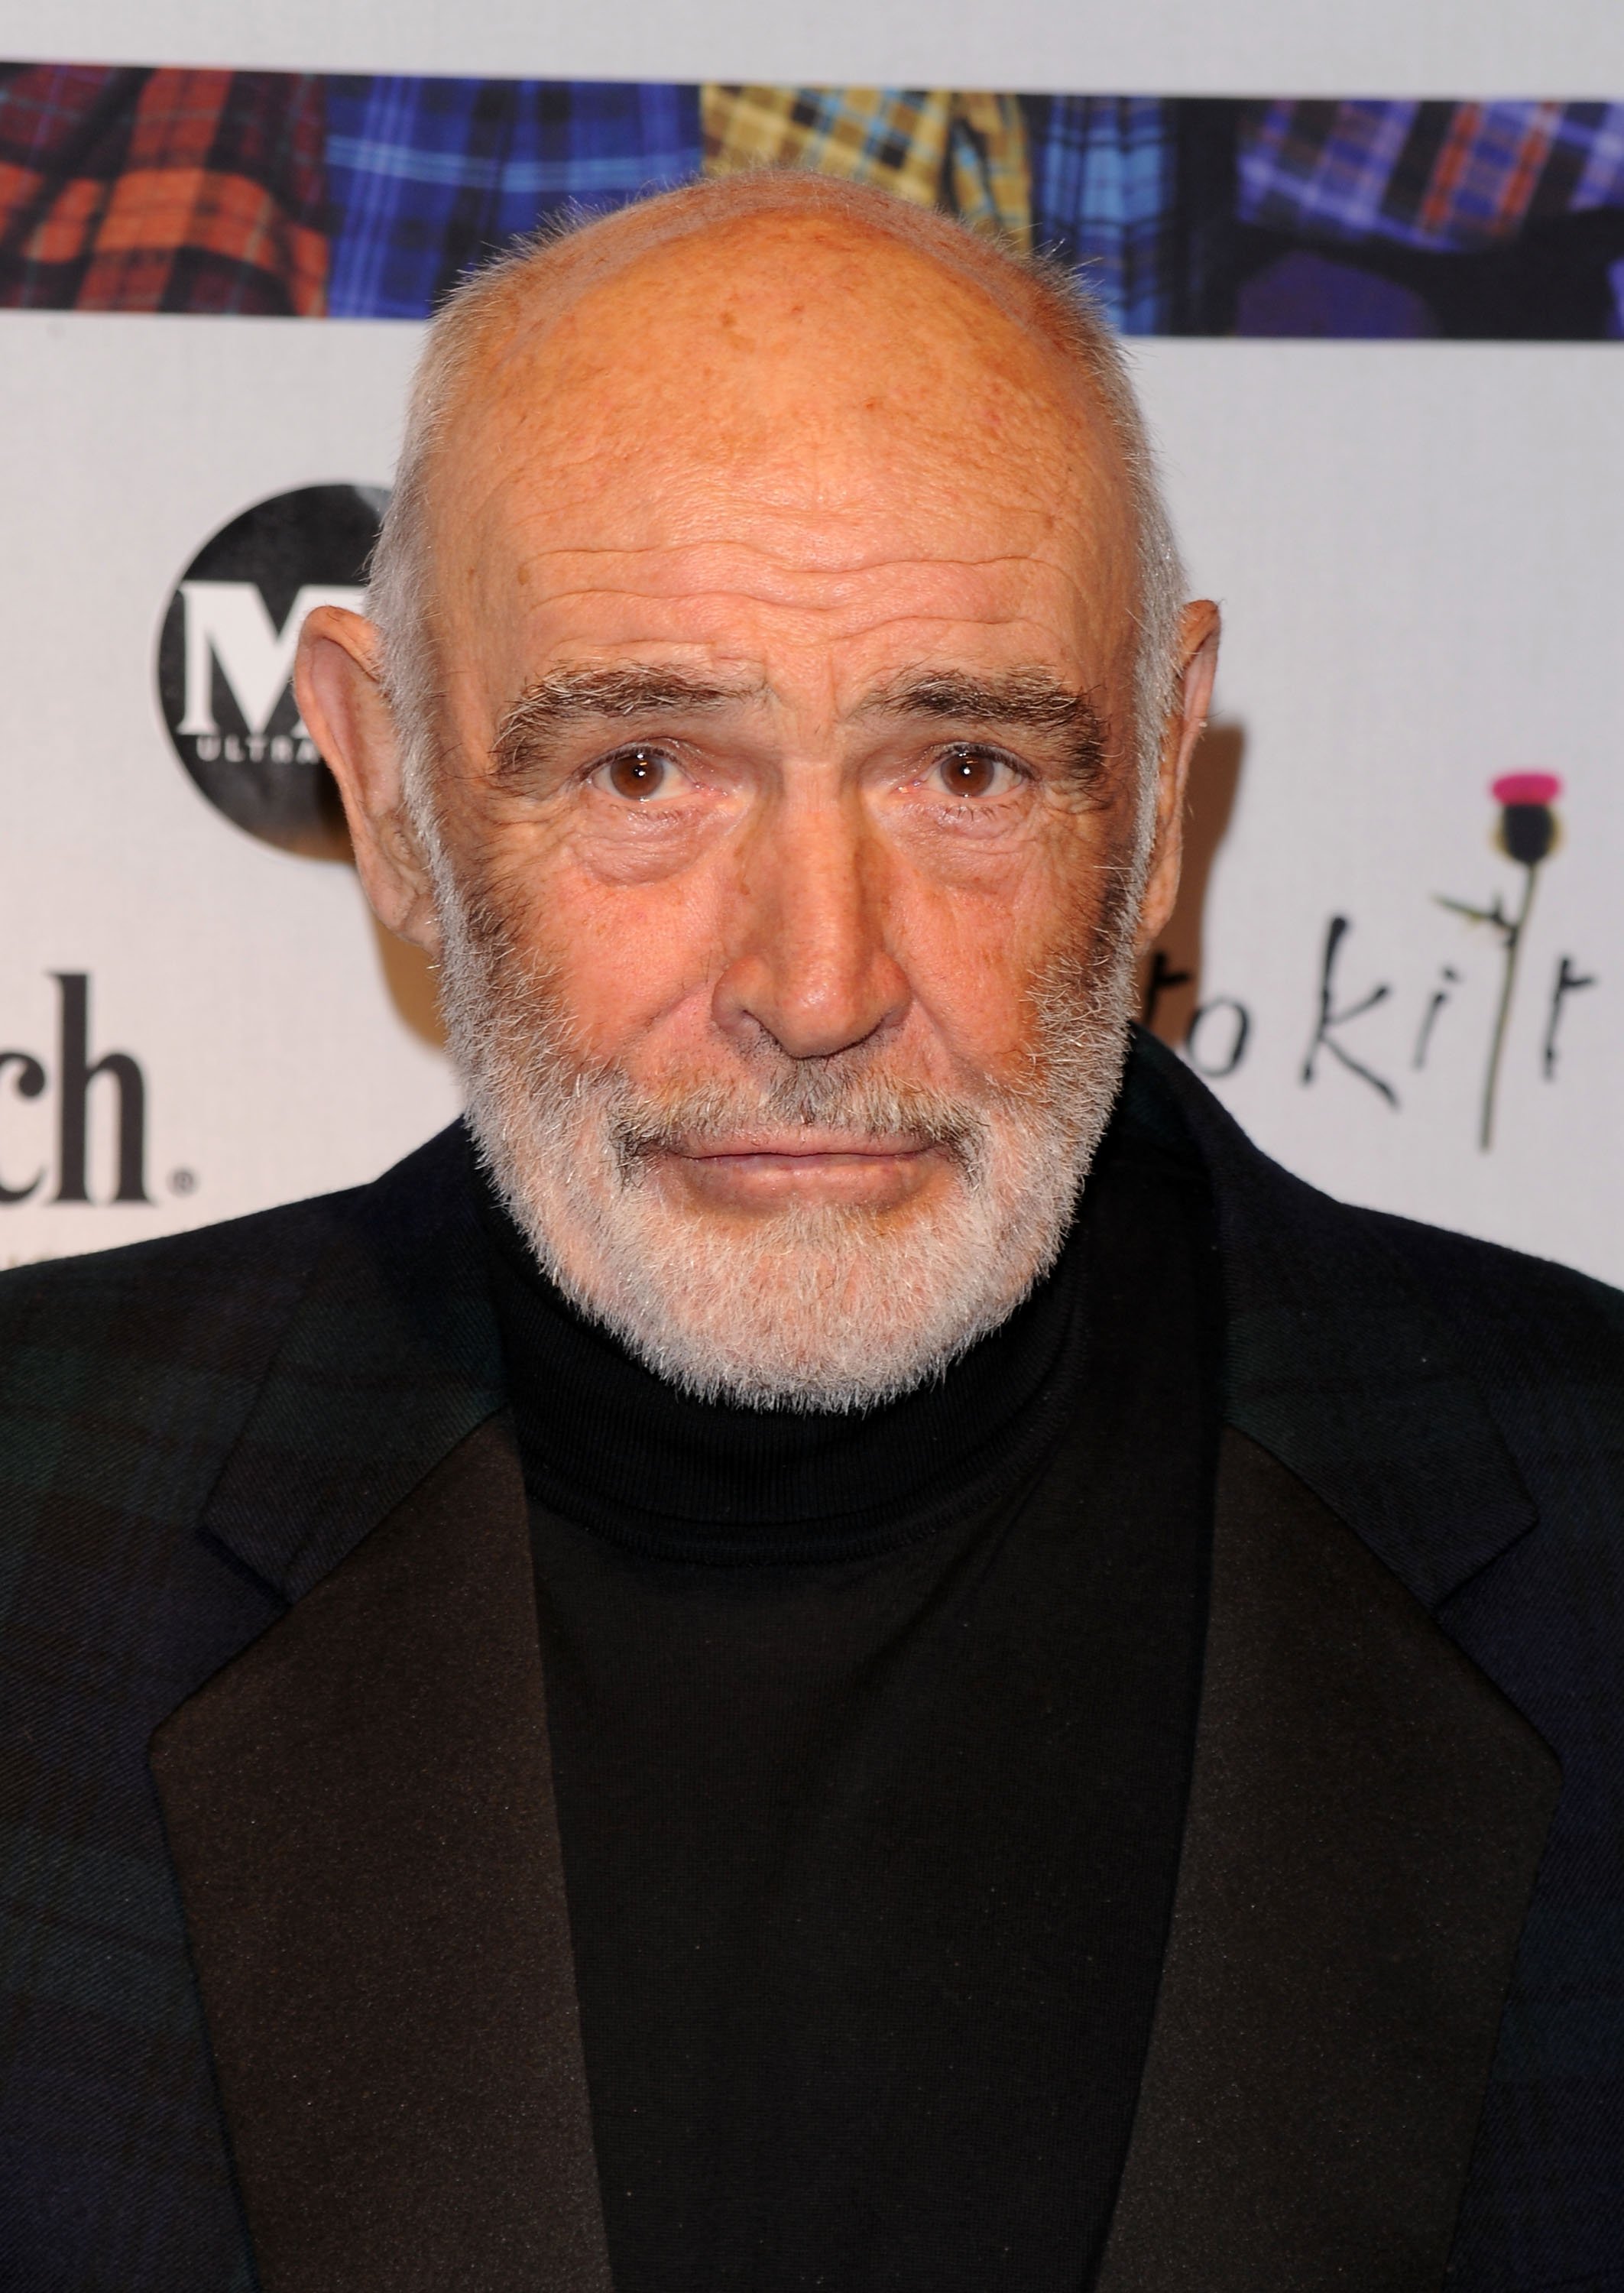 Sir Sean Connery attends the 8th annual "Dressed To Kilt" Charity Fashion Show on April 5, 2010 in New York City. | Source: Getty Images